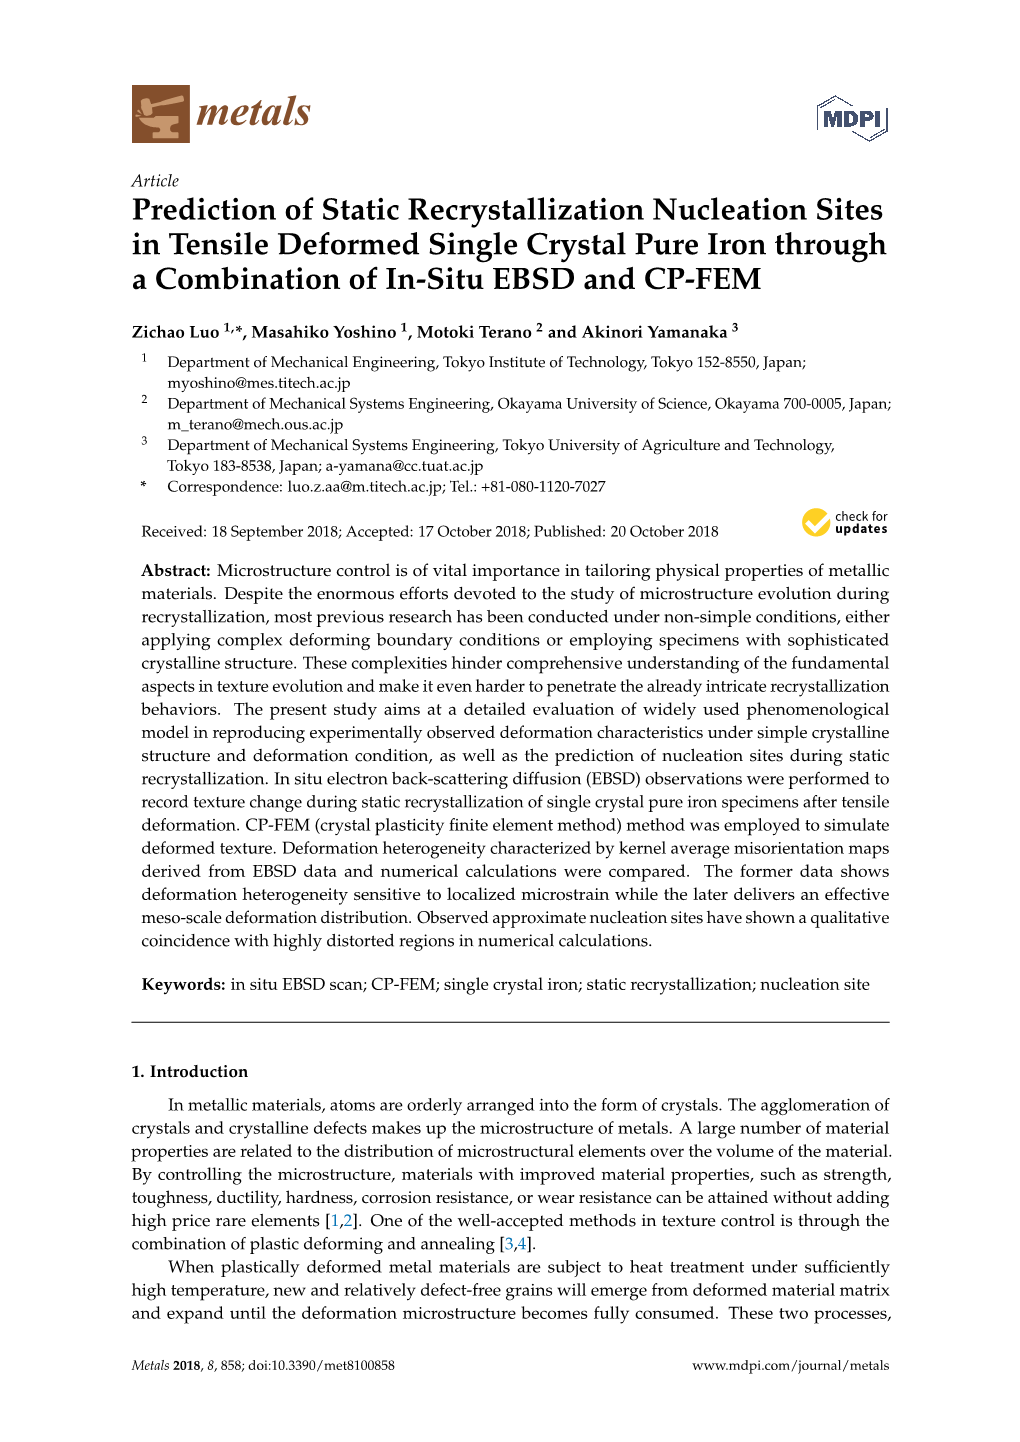 Prediction of Static Recrystallization Nucleation Sites in Tensile Deformed Single Crystal Pure Iron Through a Combination of In-Situ EBSD and CP-FEM